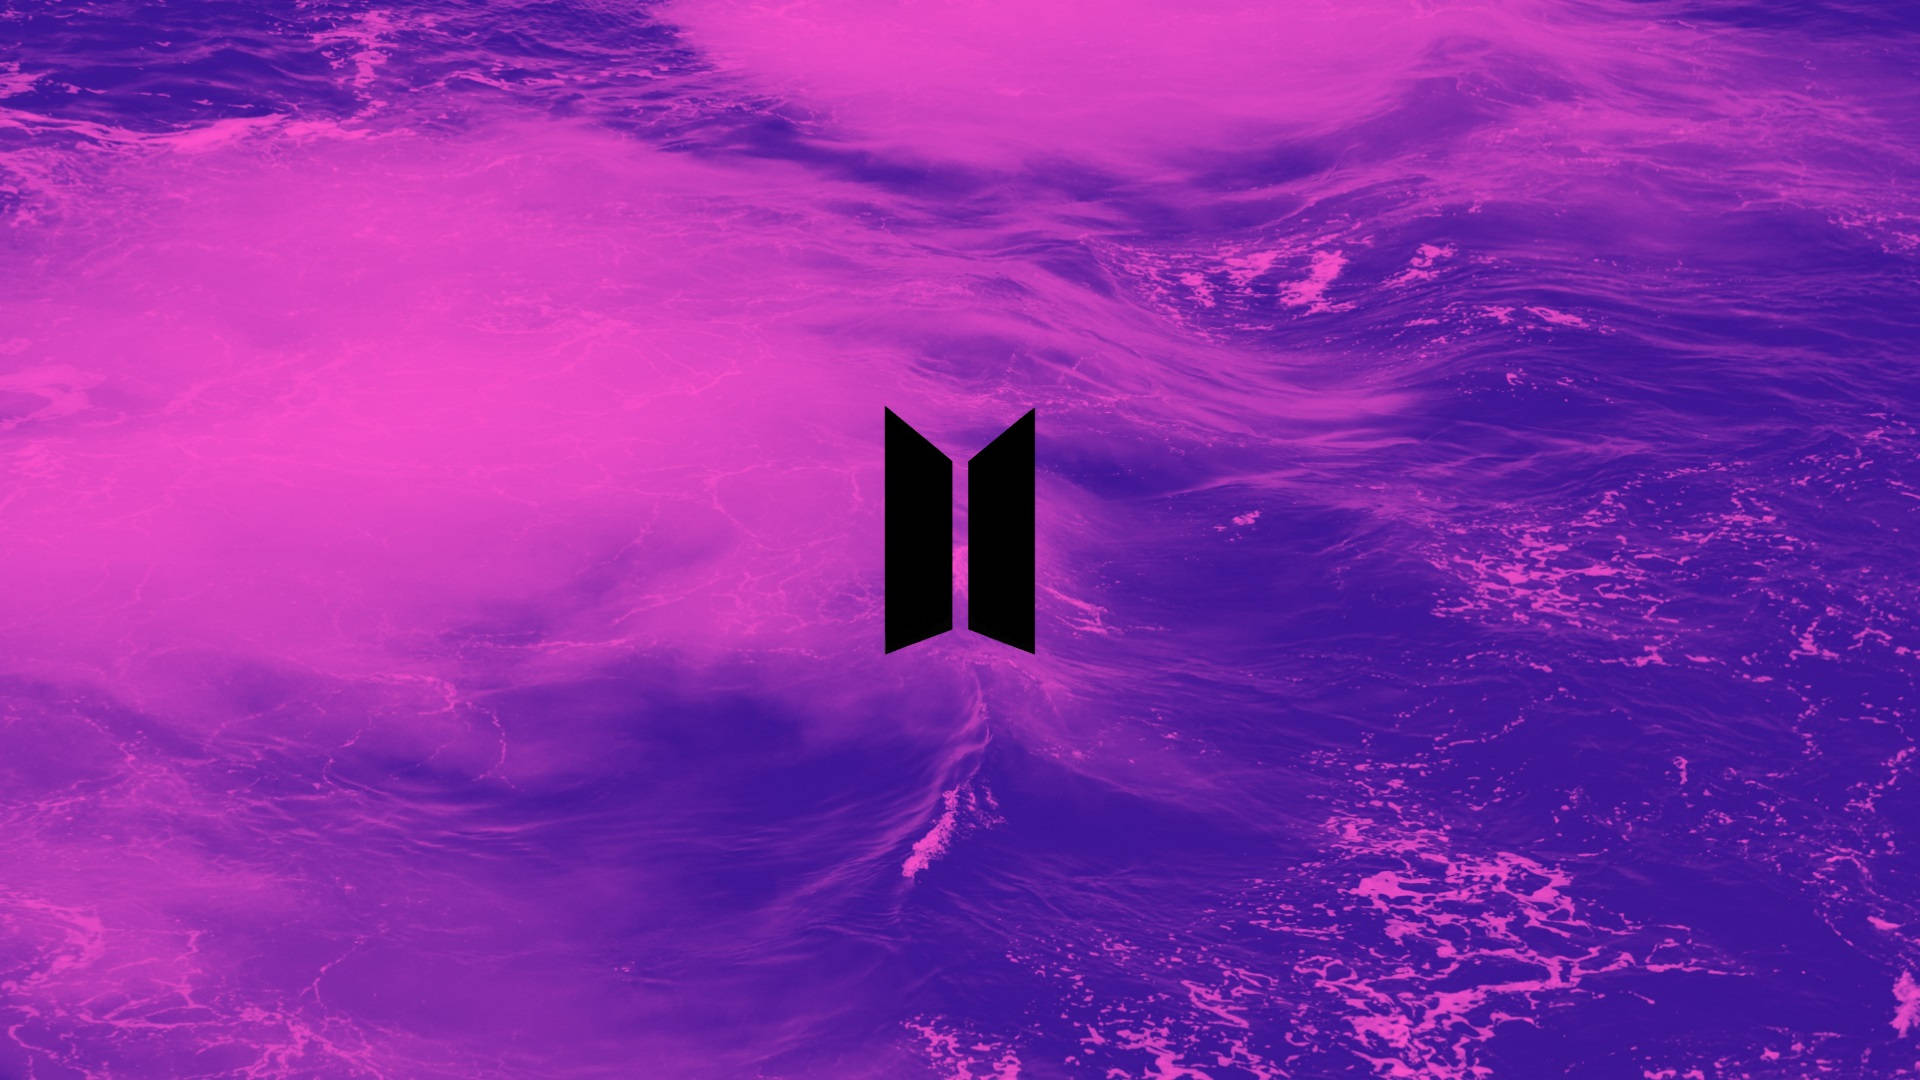 Bts Logo On Clouds Above Sea Laptop Background